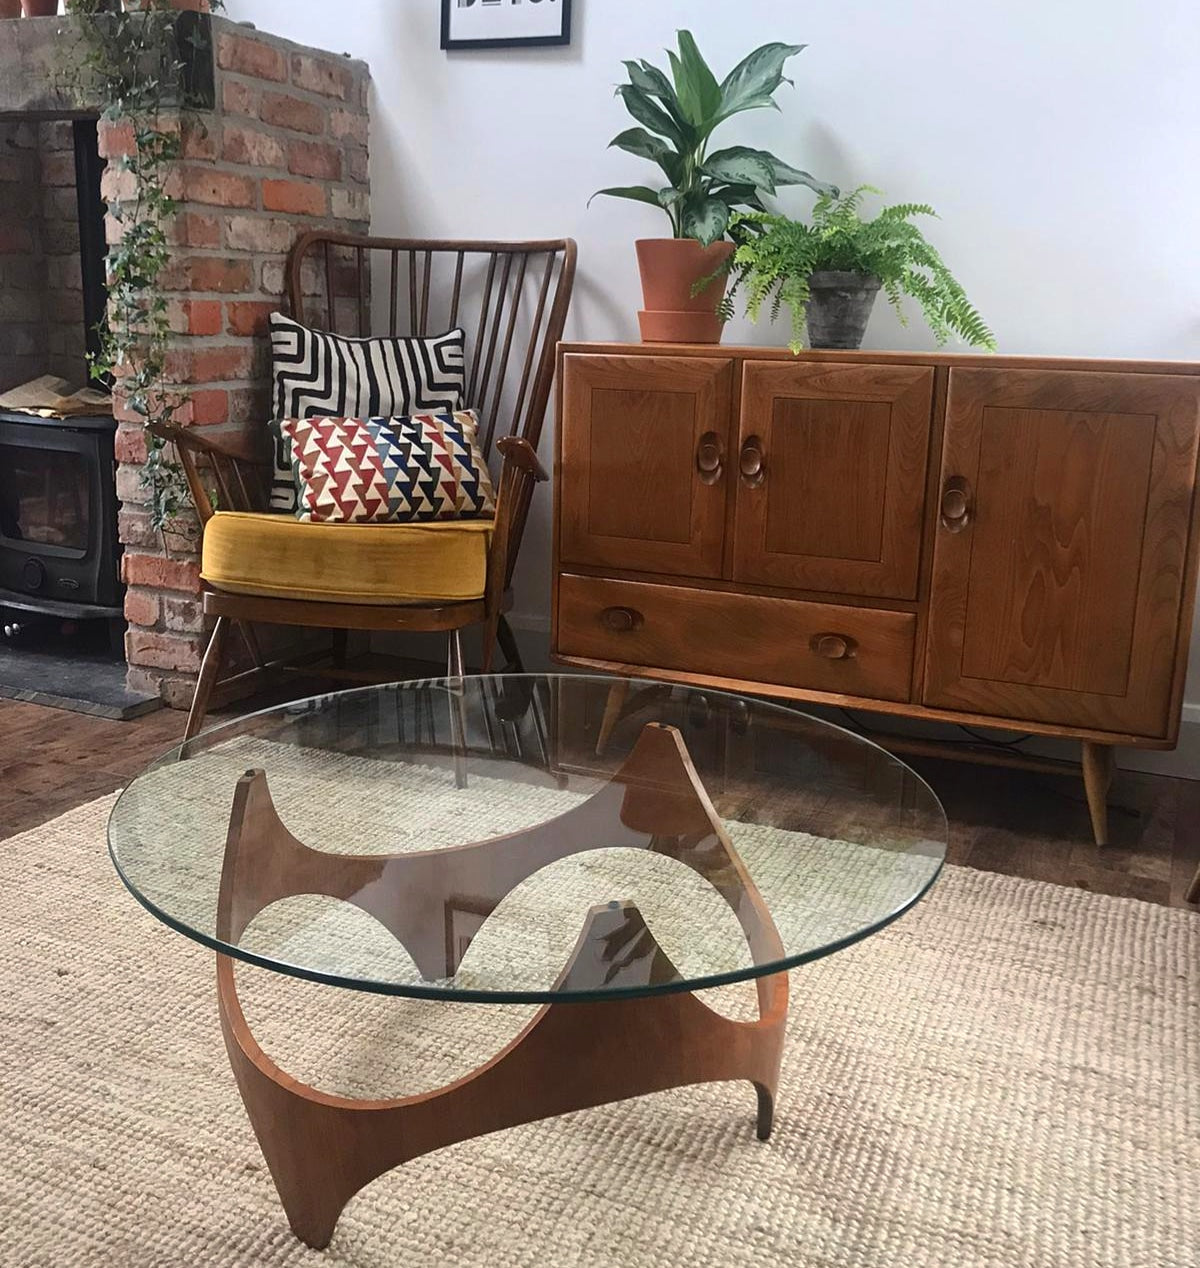 Iconic mid century Henry P glass table